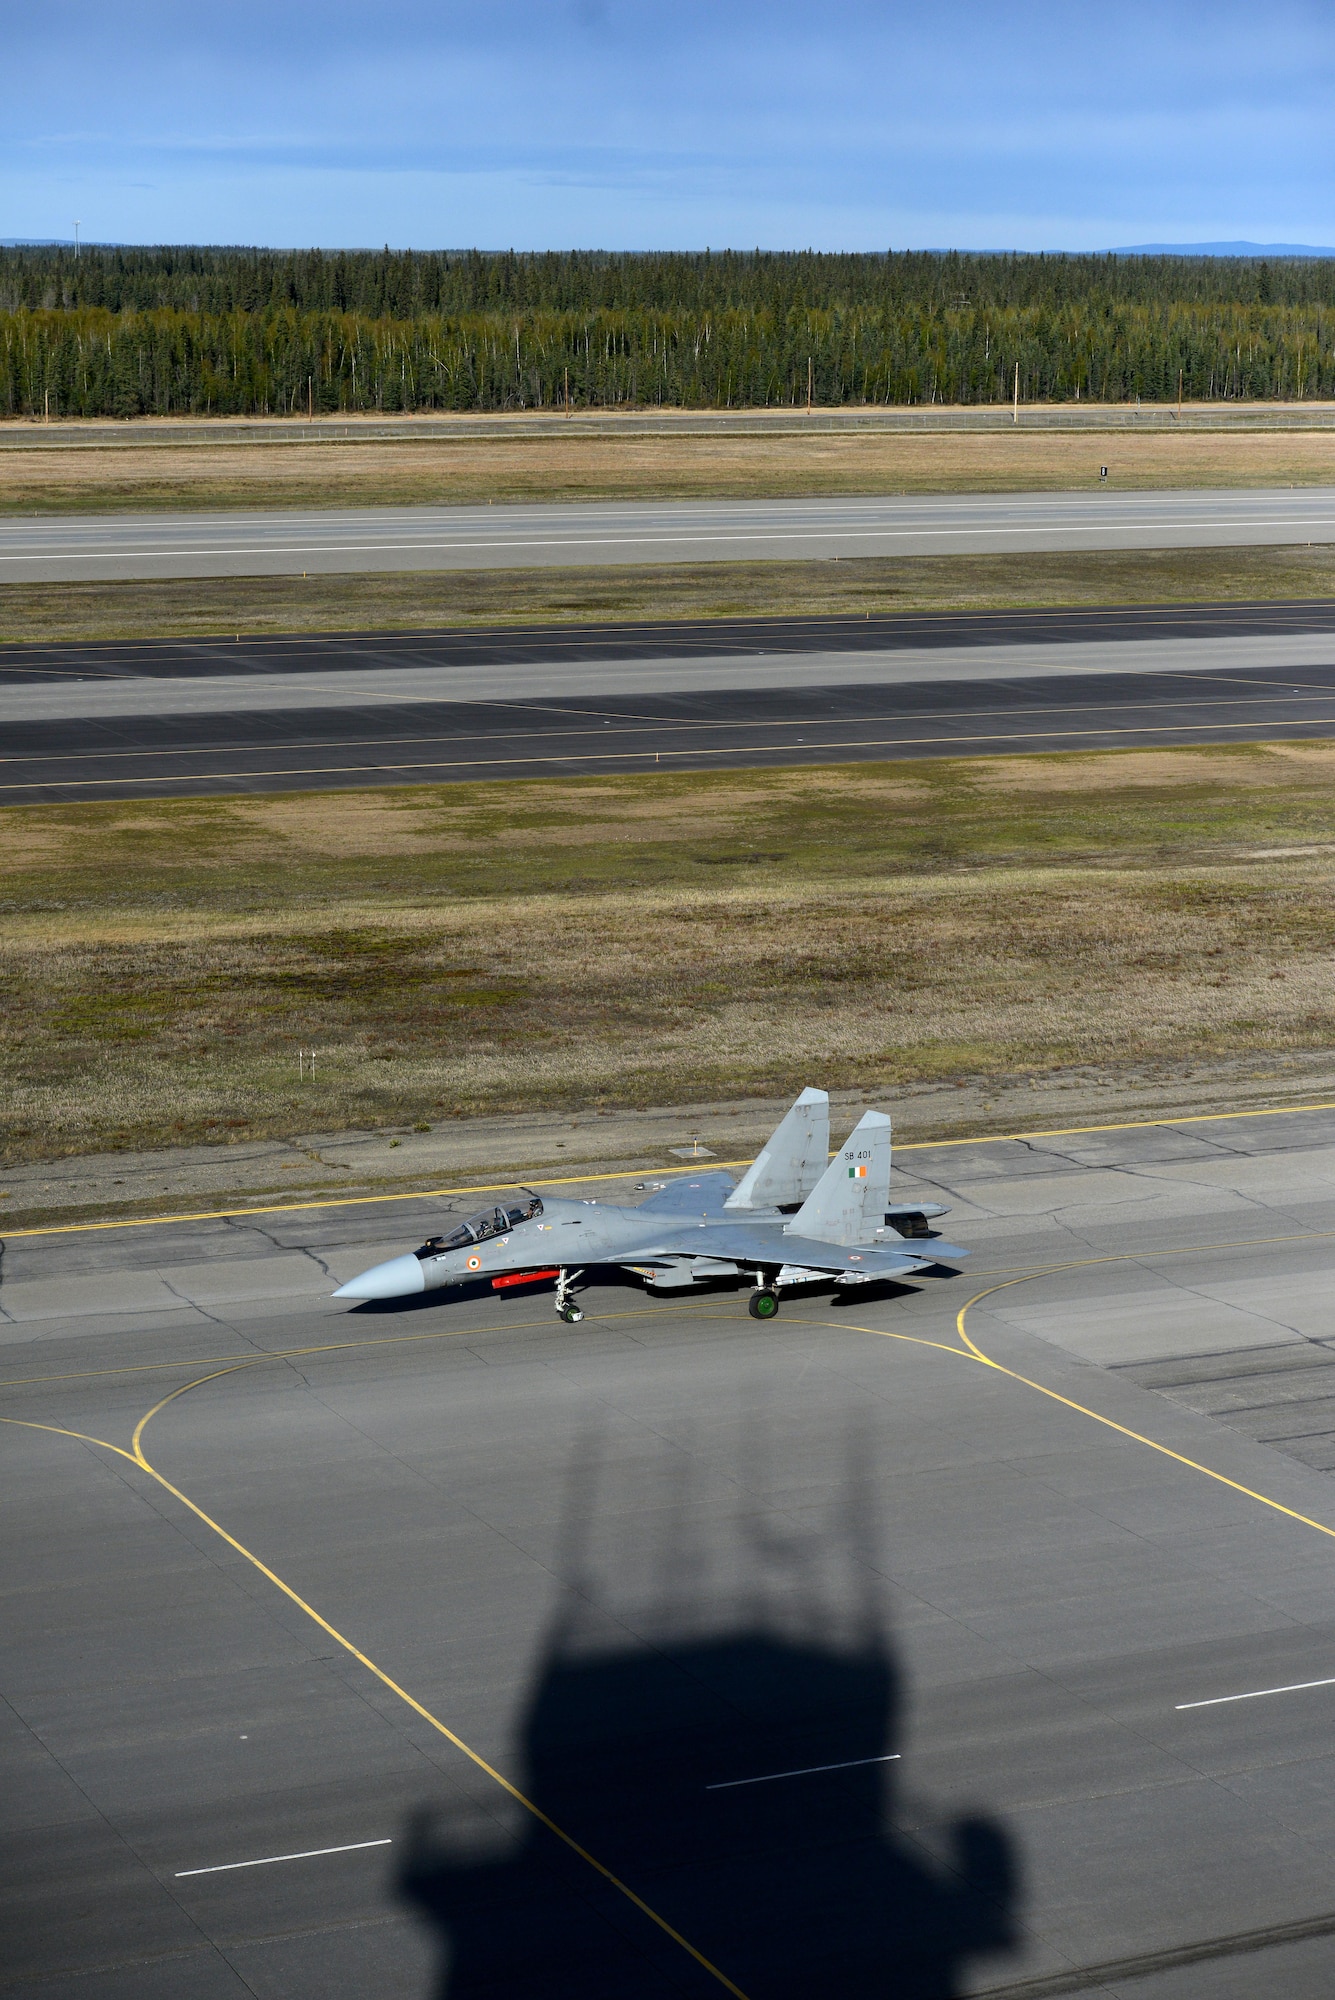 A Sukhoi SU-30 MKI taxi's down the tarmac. The SU-30 is a twinjet multirole air superiority fighter developed by Russia's Sukhoi and built under licence by India's Hindustan Aeronautics Limited for the Indian Air Force. (U.S. Air Force photo by Tech. Sgt. Steven R. Doty) 